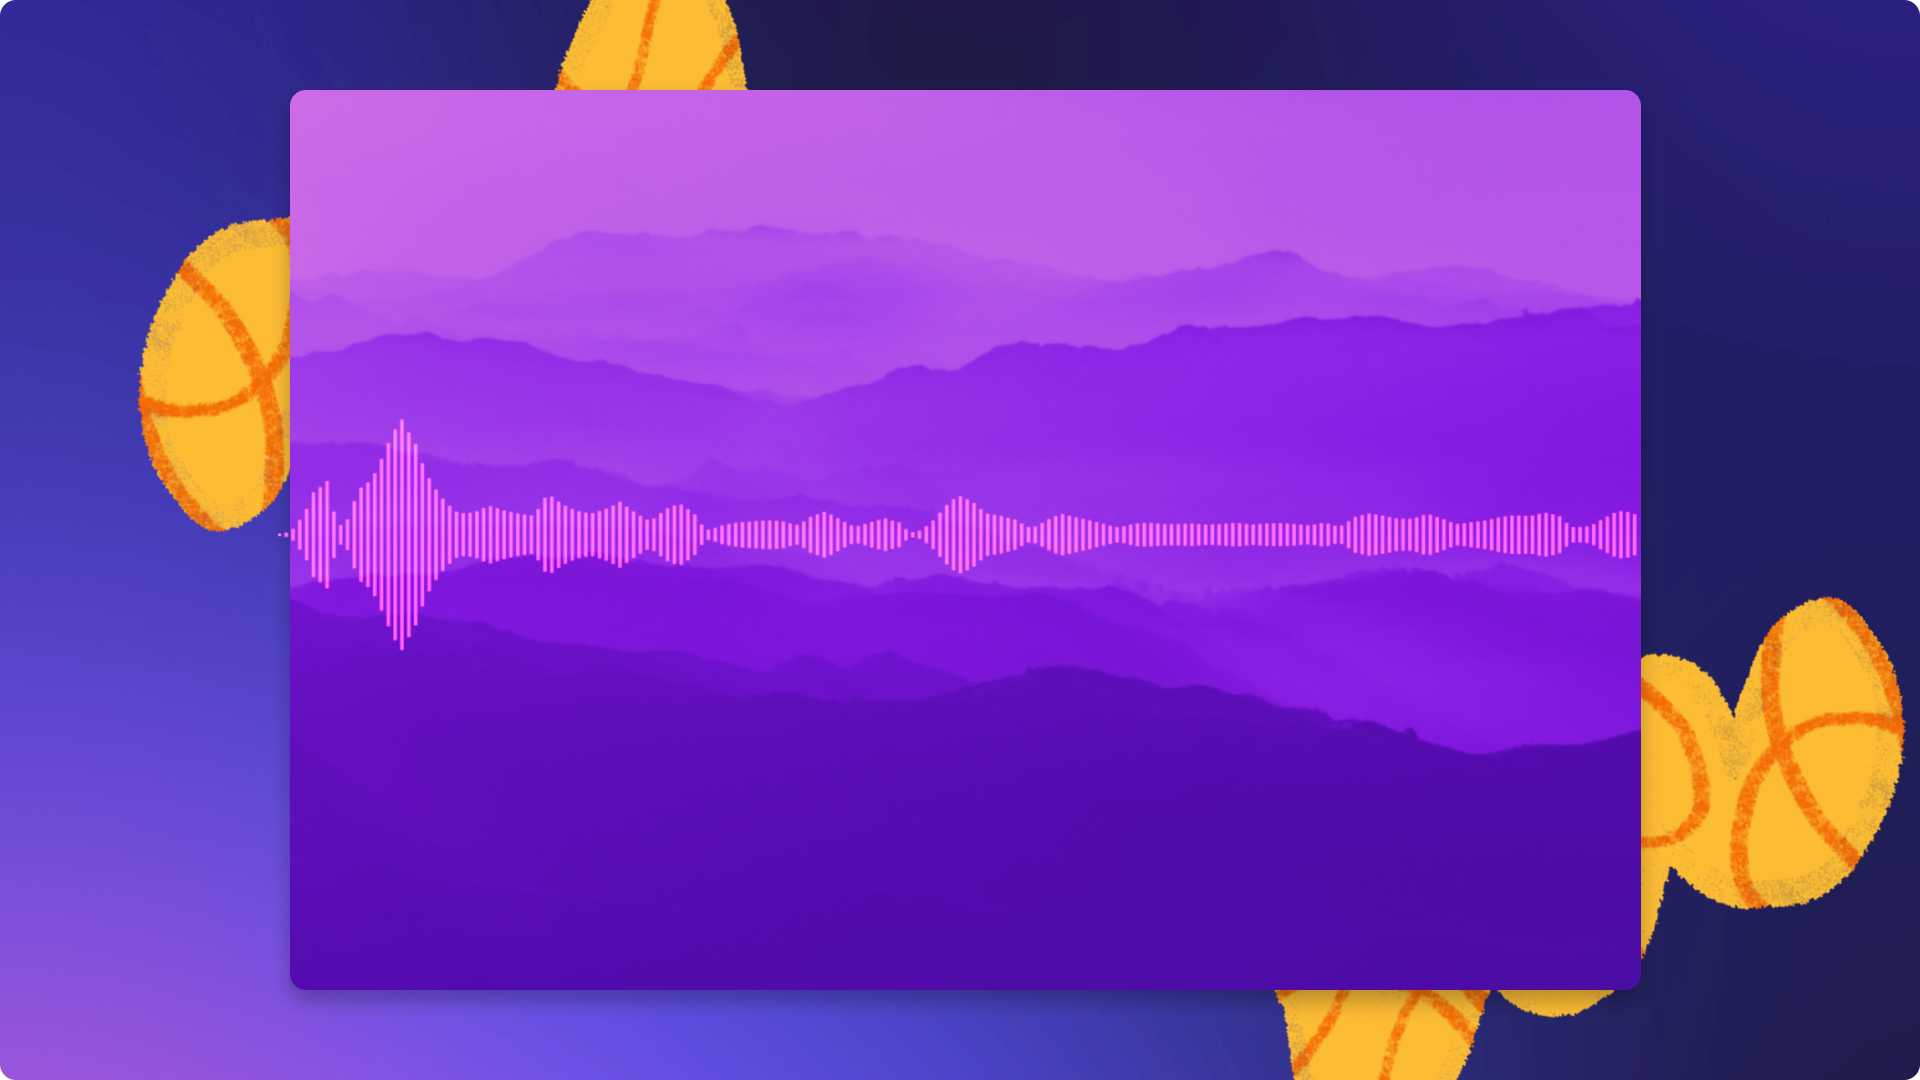 An abstract image of a sound wave to indicate generating audio in Clipchamp